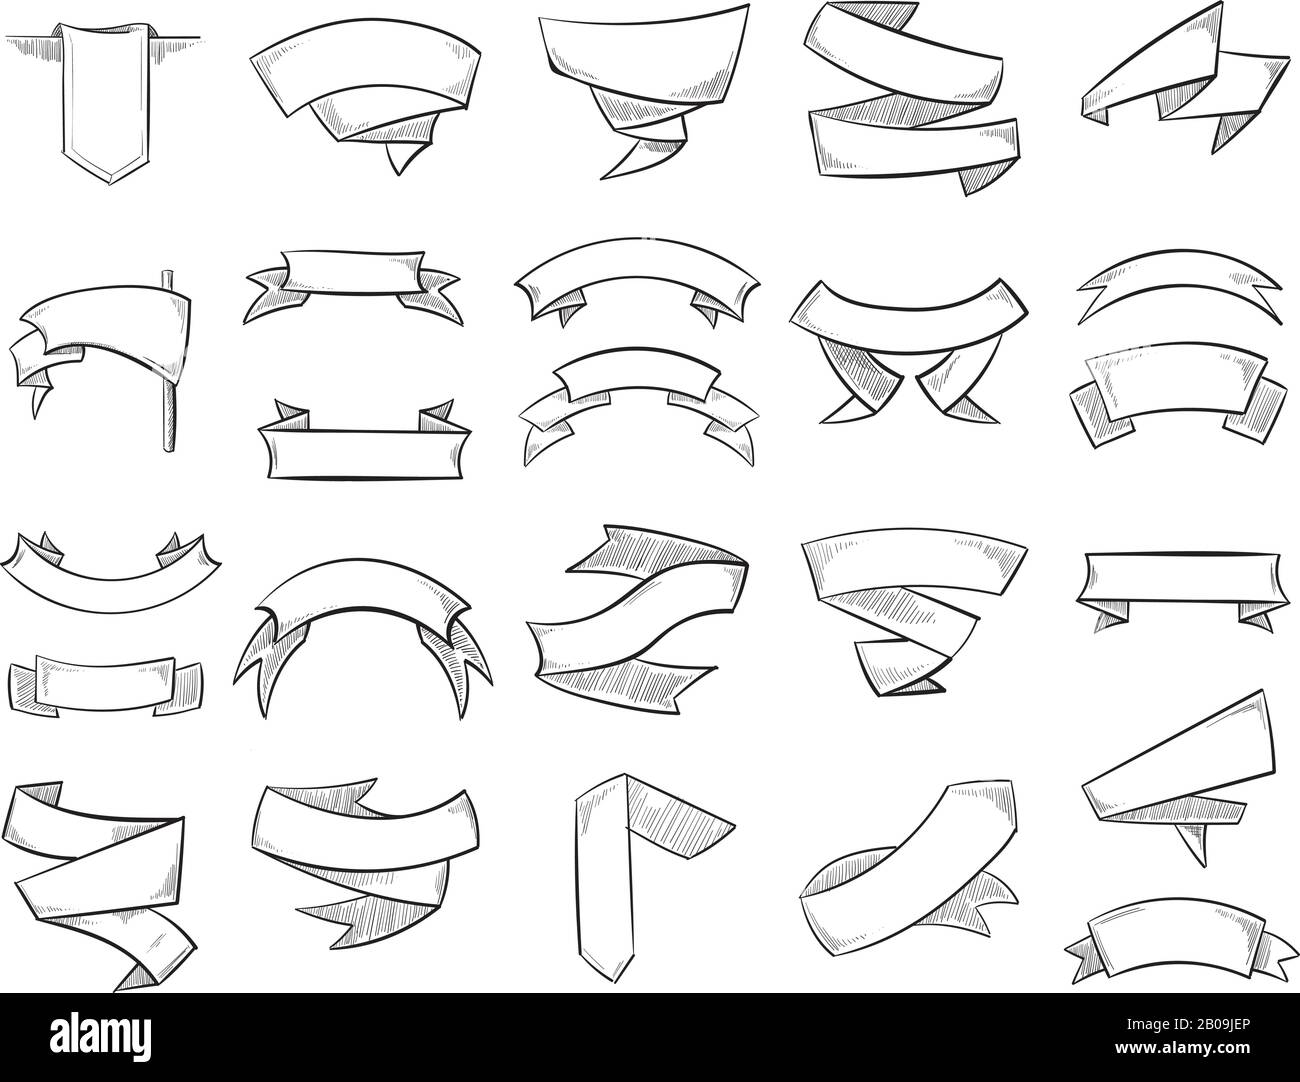 Doodle pencil drawing vector banners and ribbons. Sketch drawing scroll